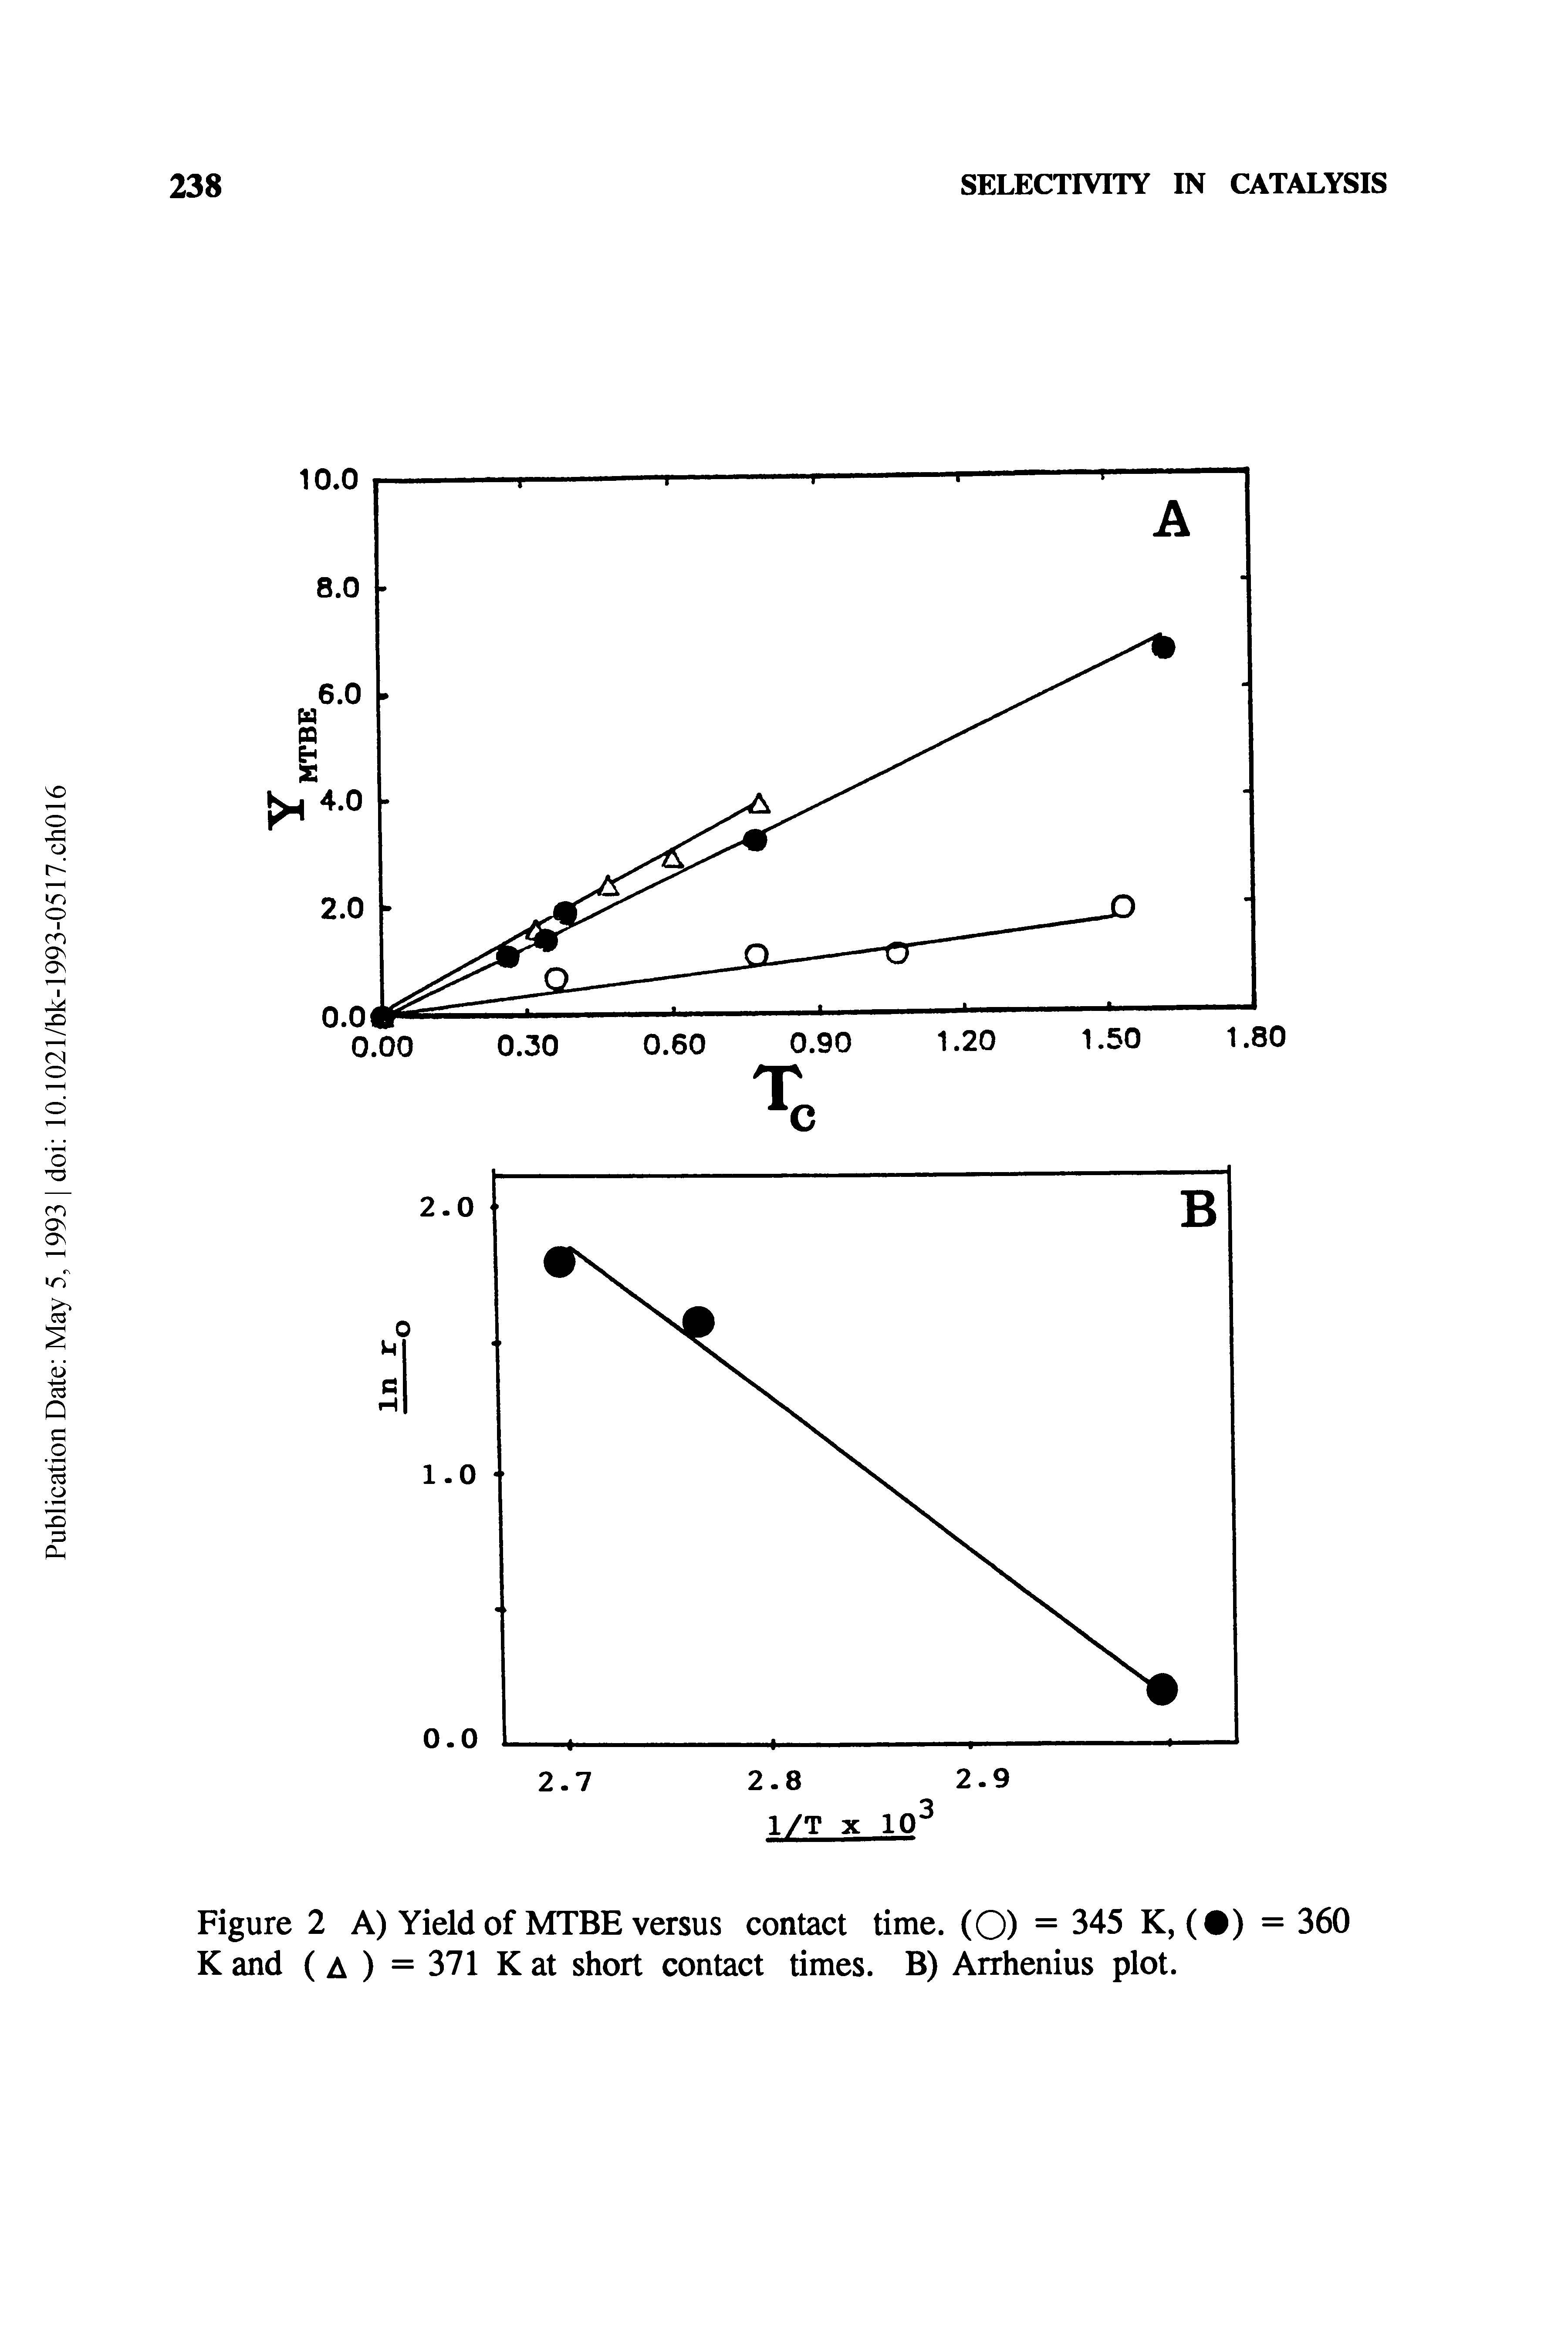 Figure 2 A) Yield of MTBE versus contact time. (O) = 345 K, ( ) = 360 K and (A ) =371 K at short contact times. B) Arrhenius plot.